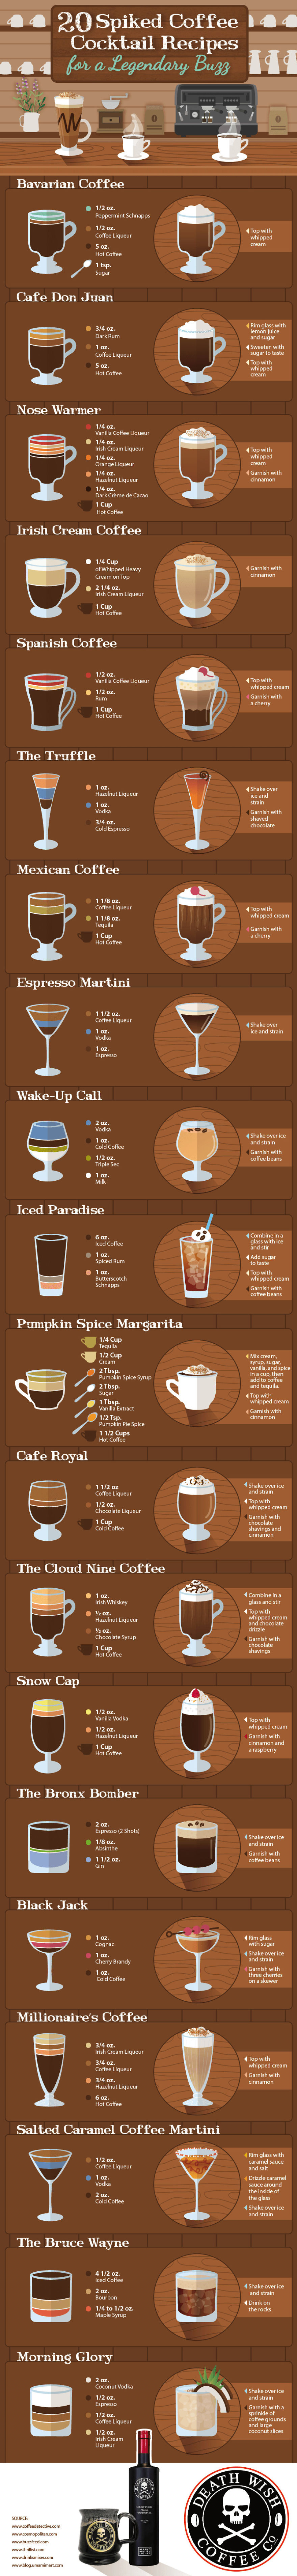 I'd Love To Try These Coffee Cocktails